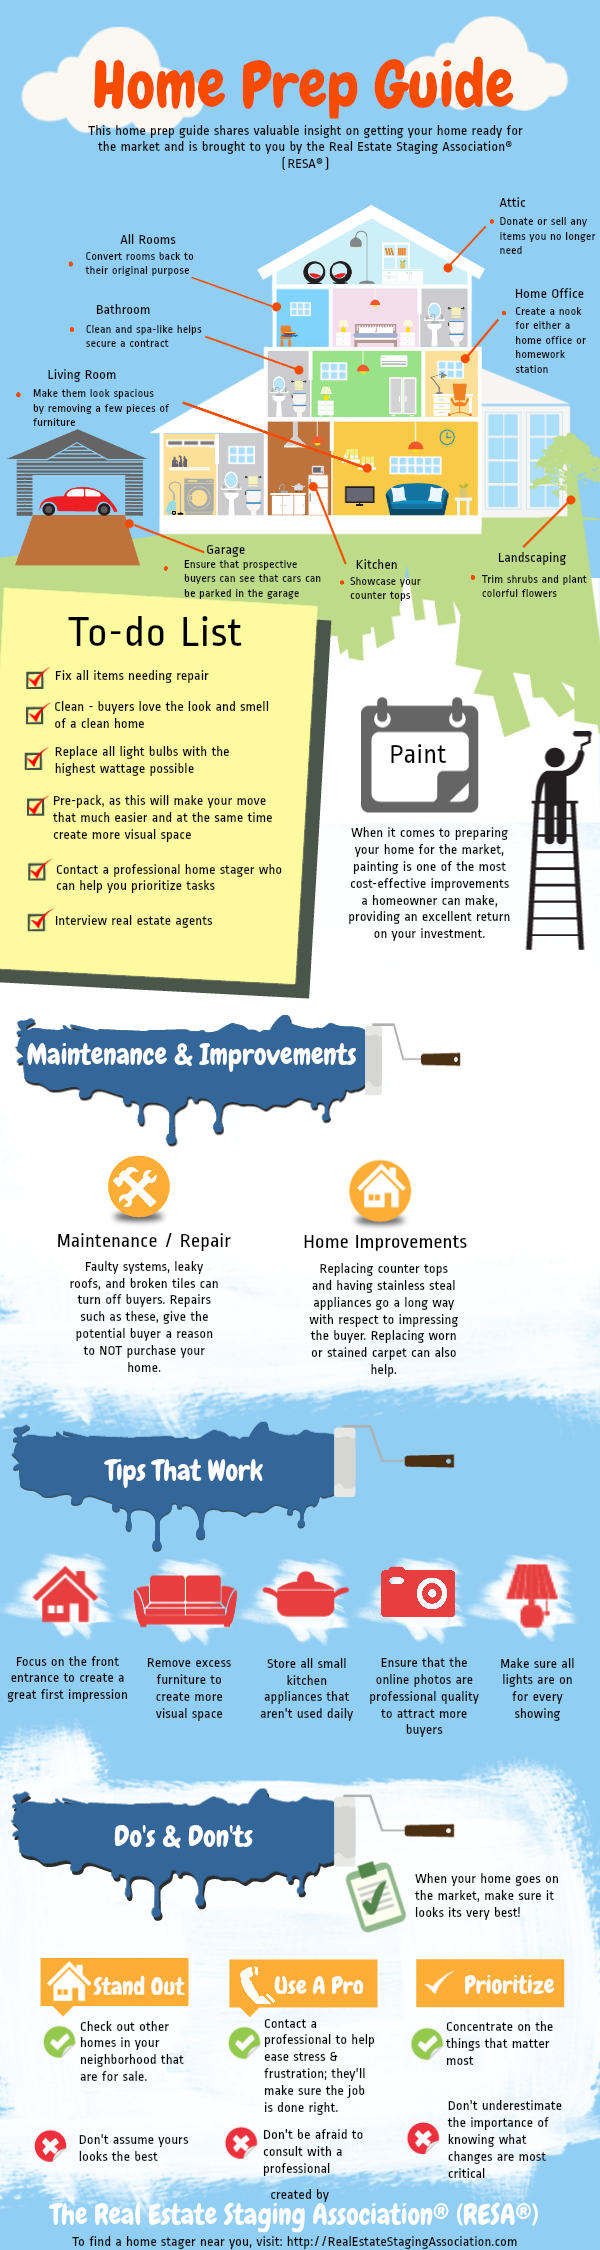 home_prep_guide_infographic_2250